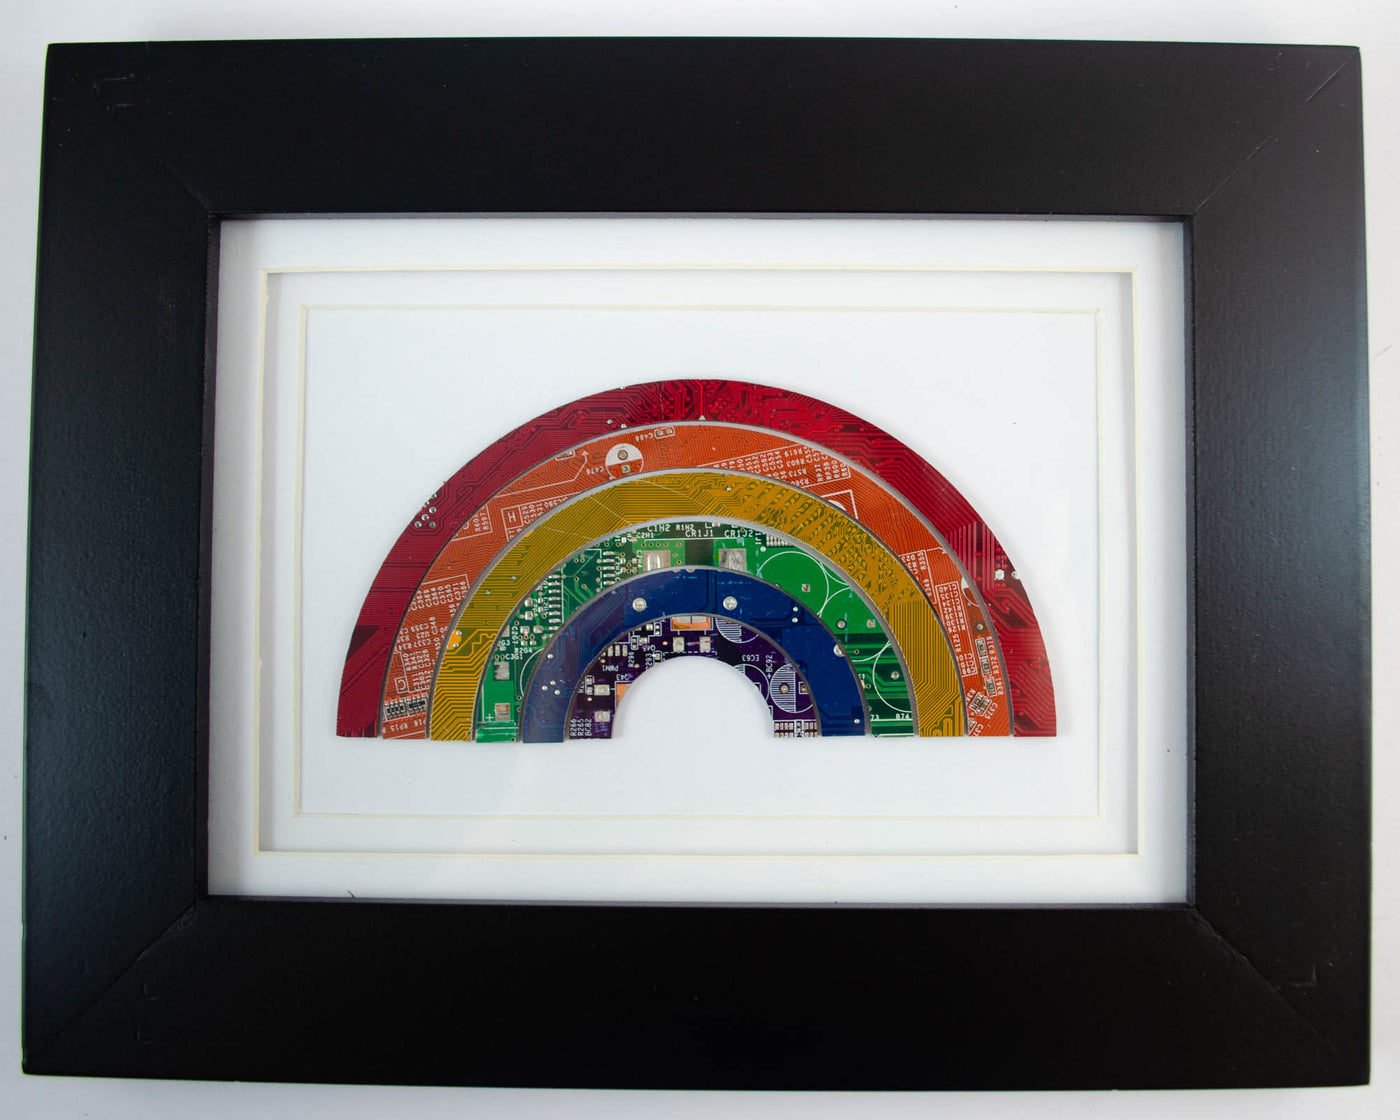 handmade framed art piece made from recycled circuit boards and made into a rainbow